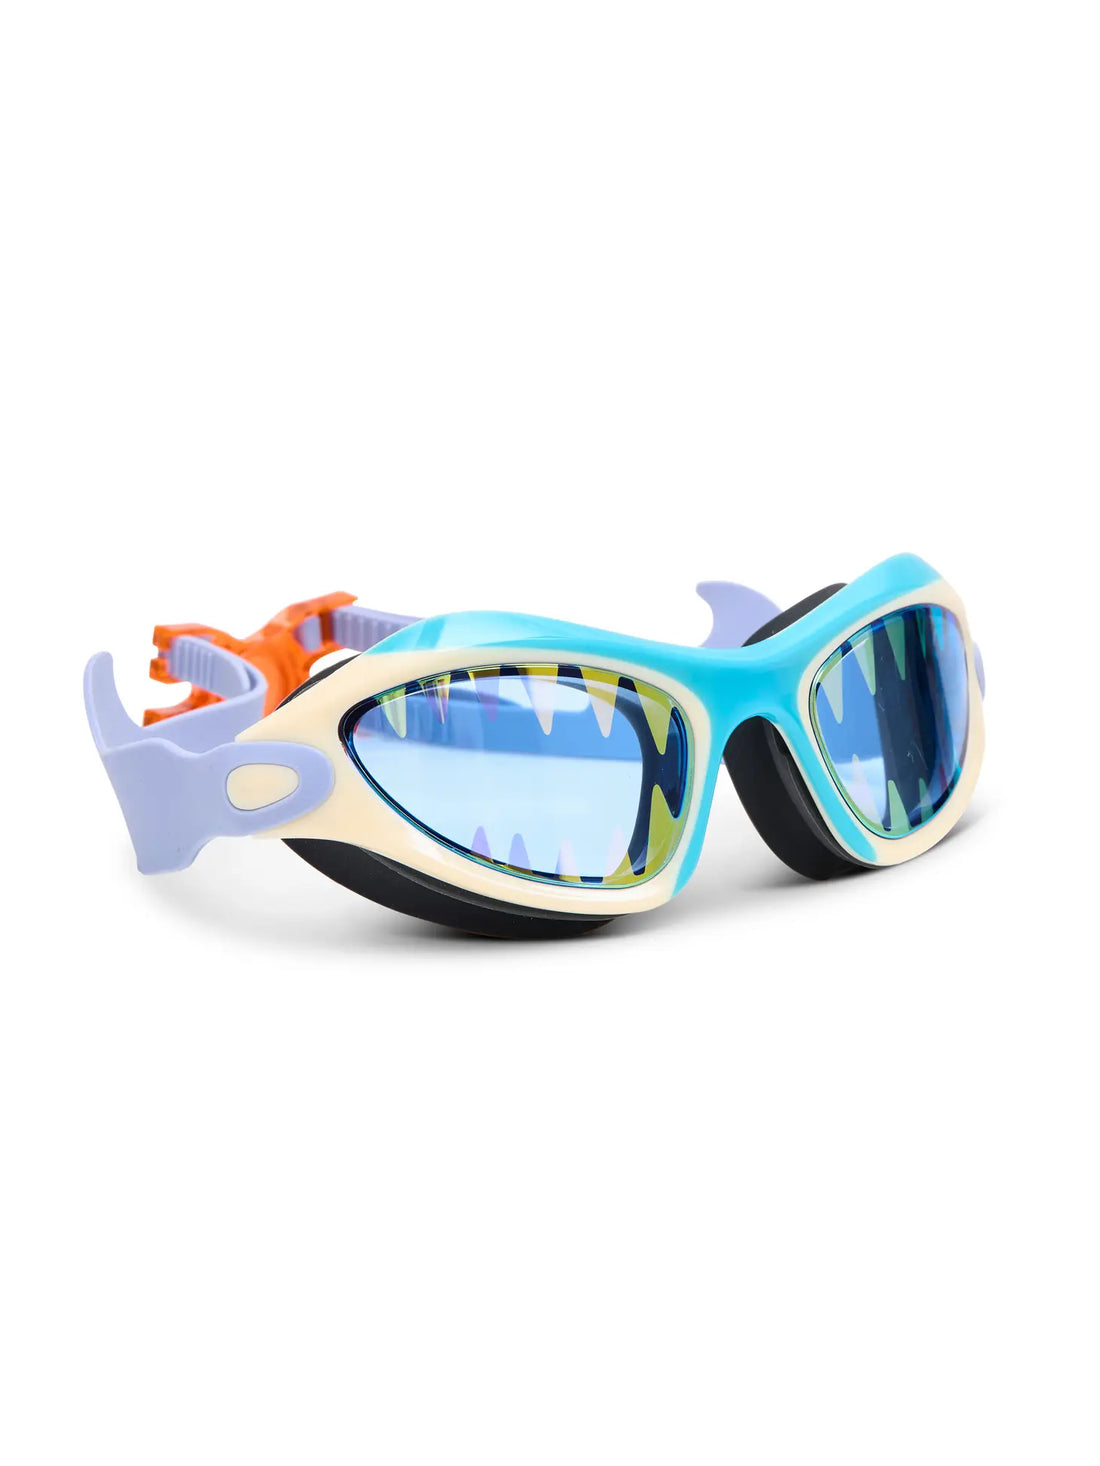 Megamouth Shark Goggles Preview #2